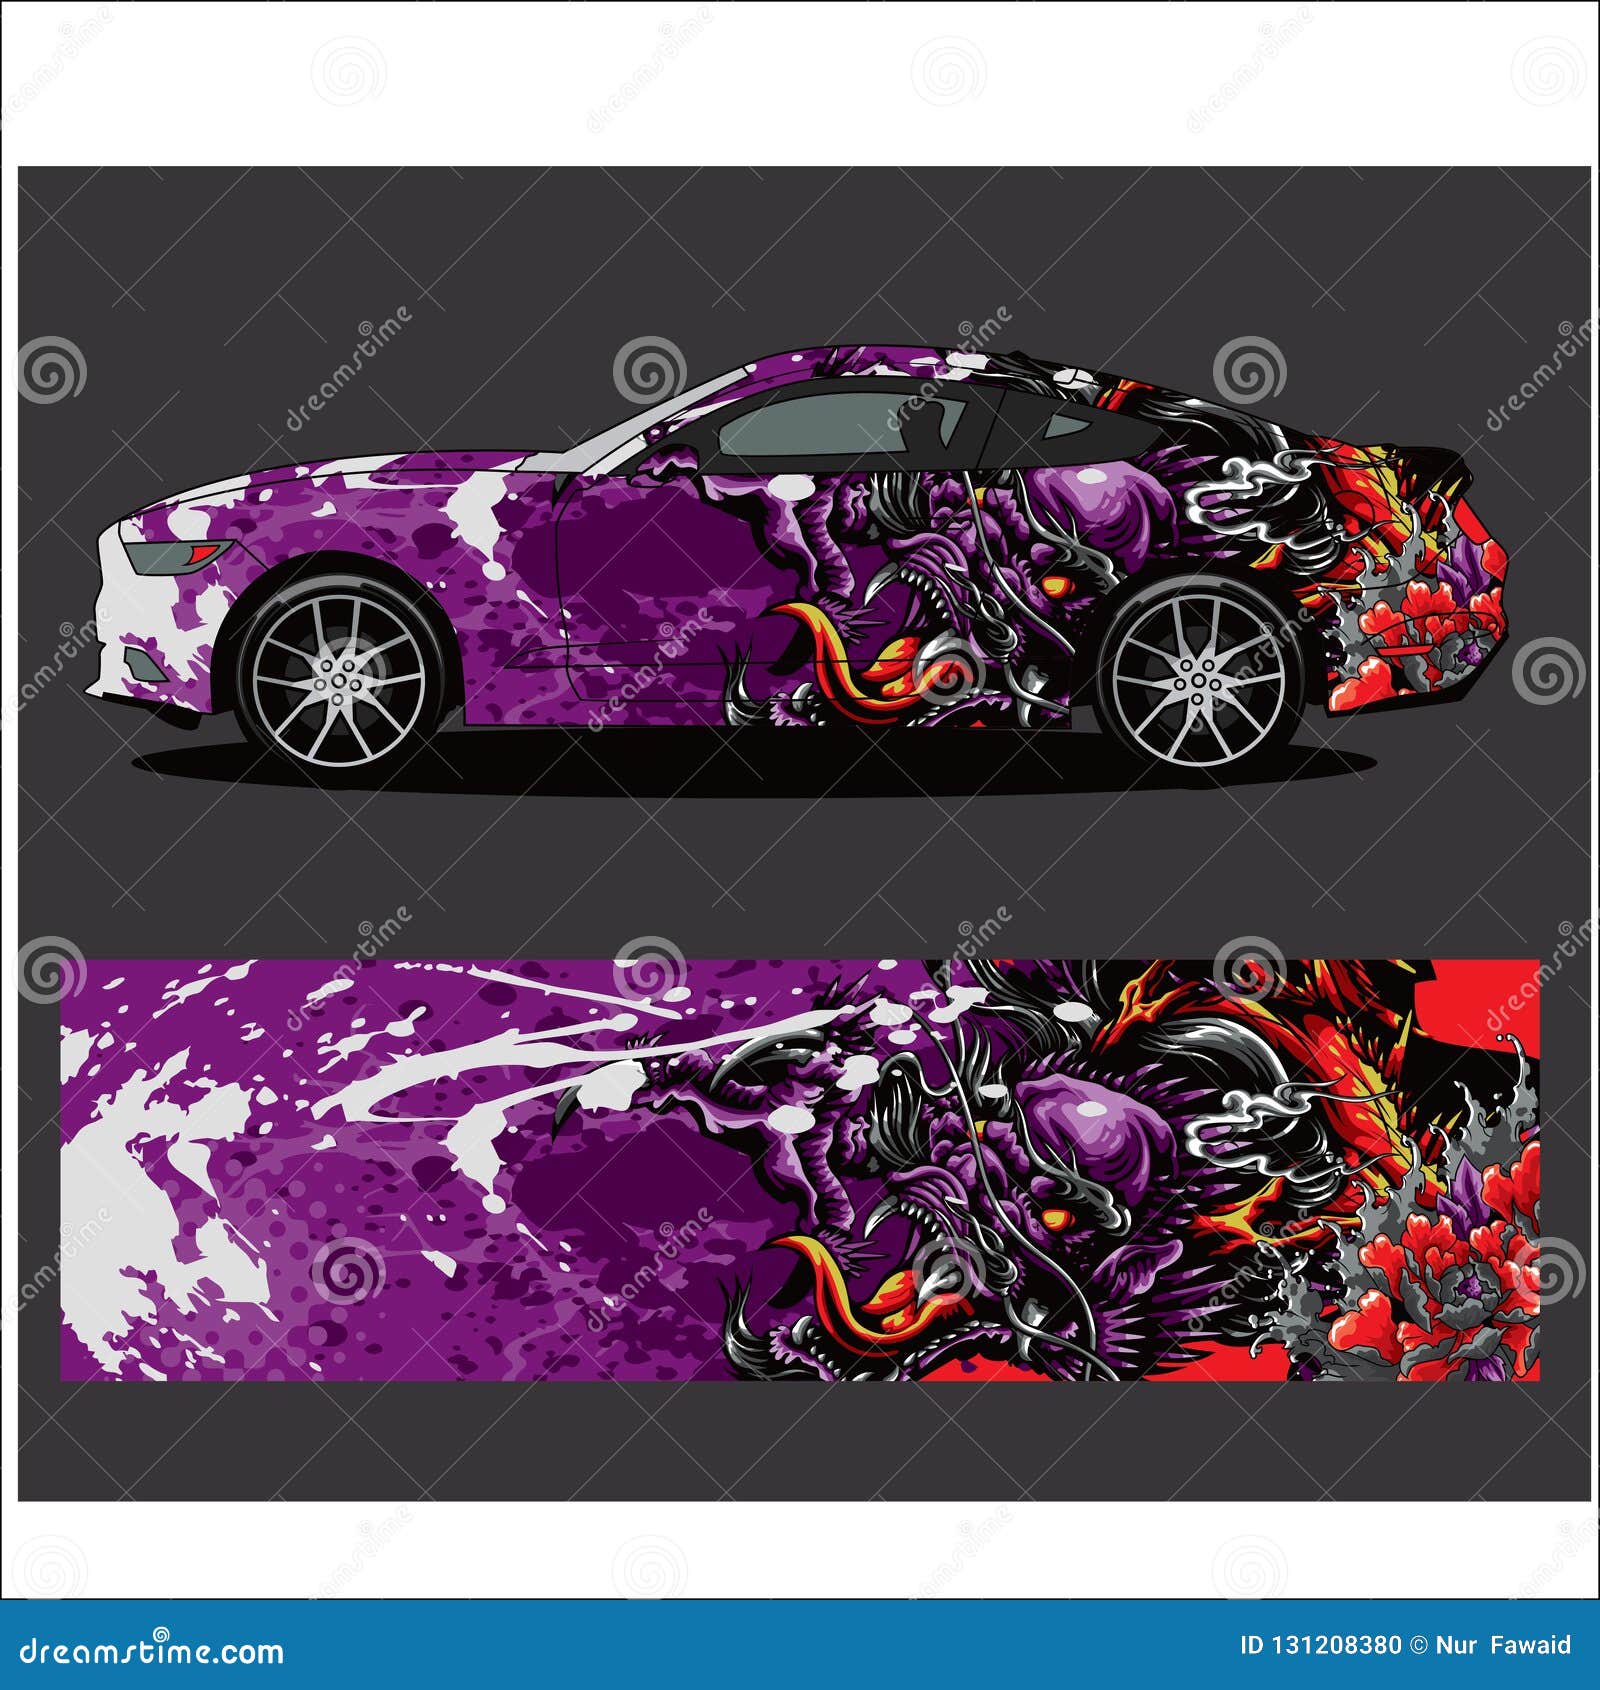 Tribal Flame Car Tattoo Motorcycle Sticker Stock Vector Royalty Free  2205513949  Shutterstock  Motorcycle stickers Car tattoos Motorcycle  tattoos